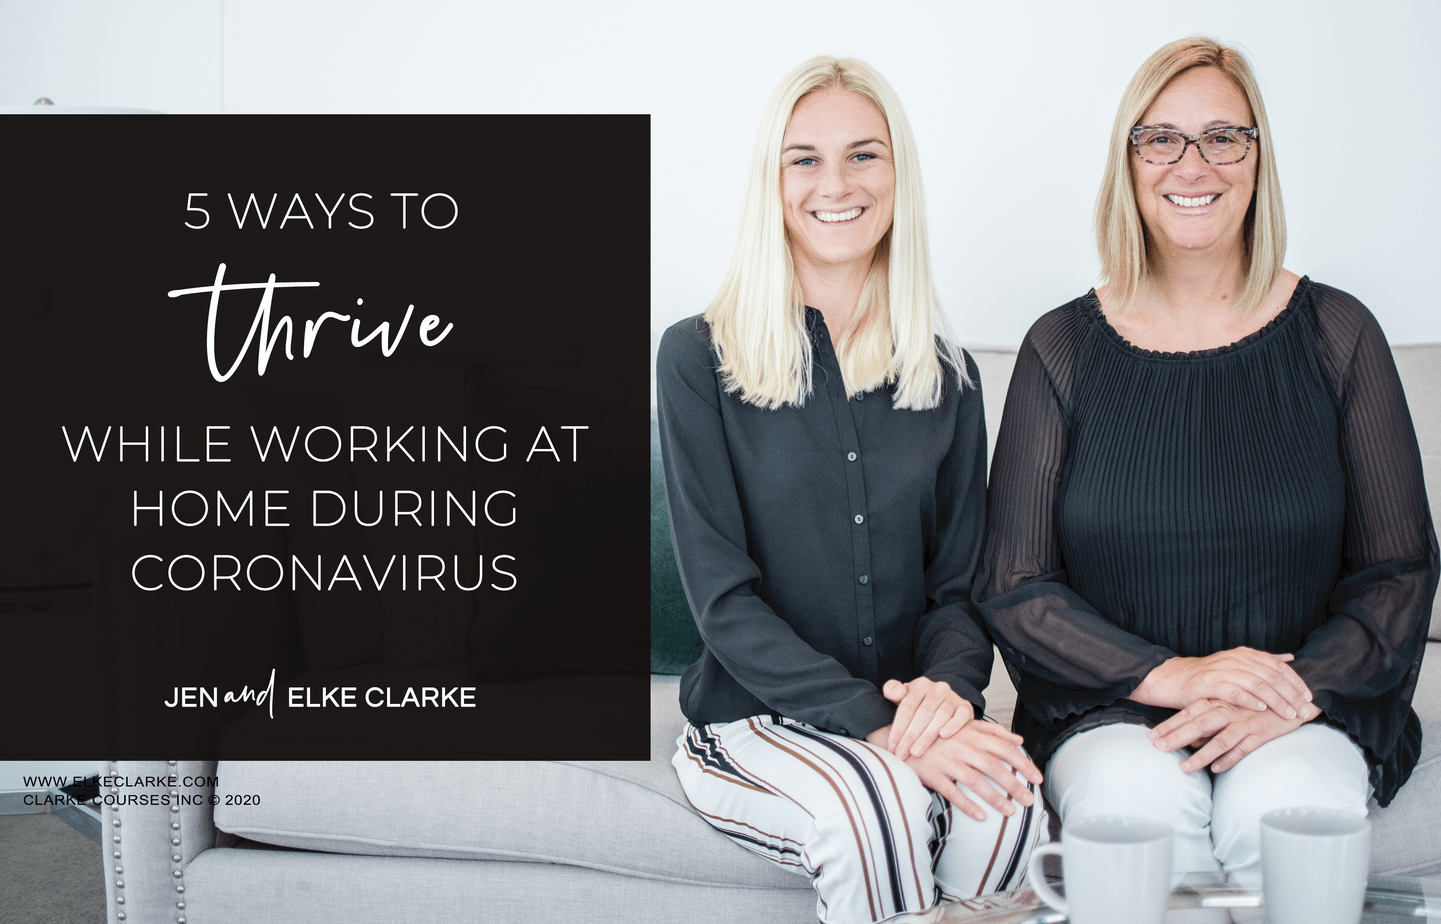 Jen and Elke Clarke | 5 Ways to Thrive While Working at Home During Coronavirus